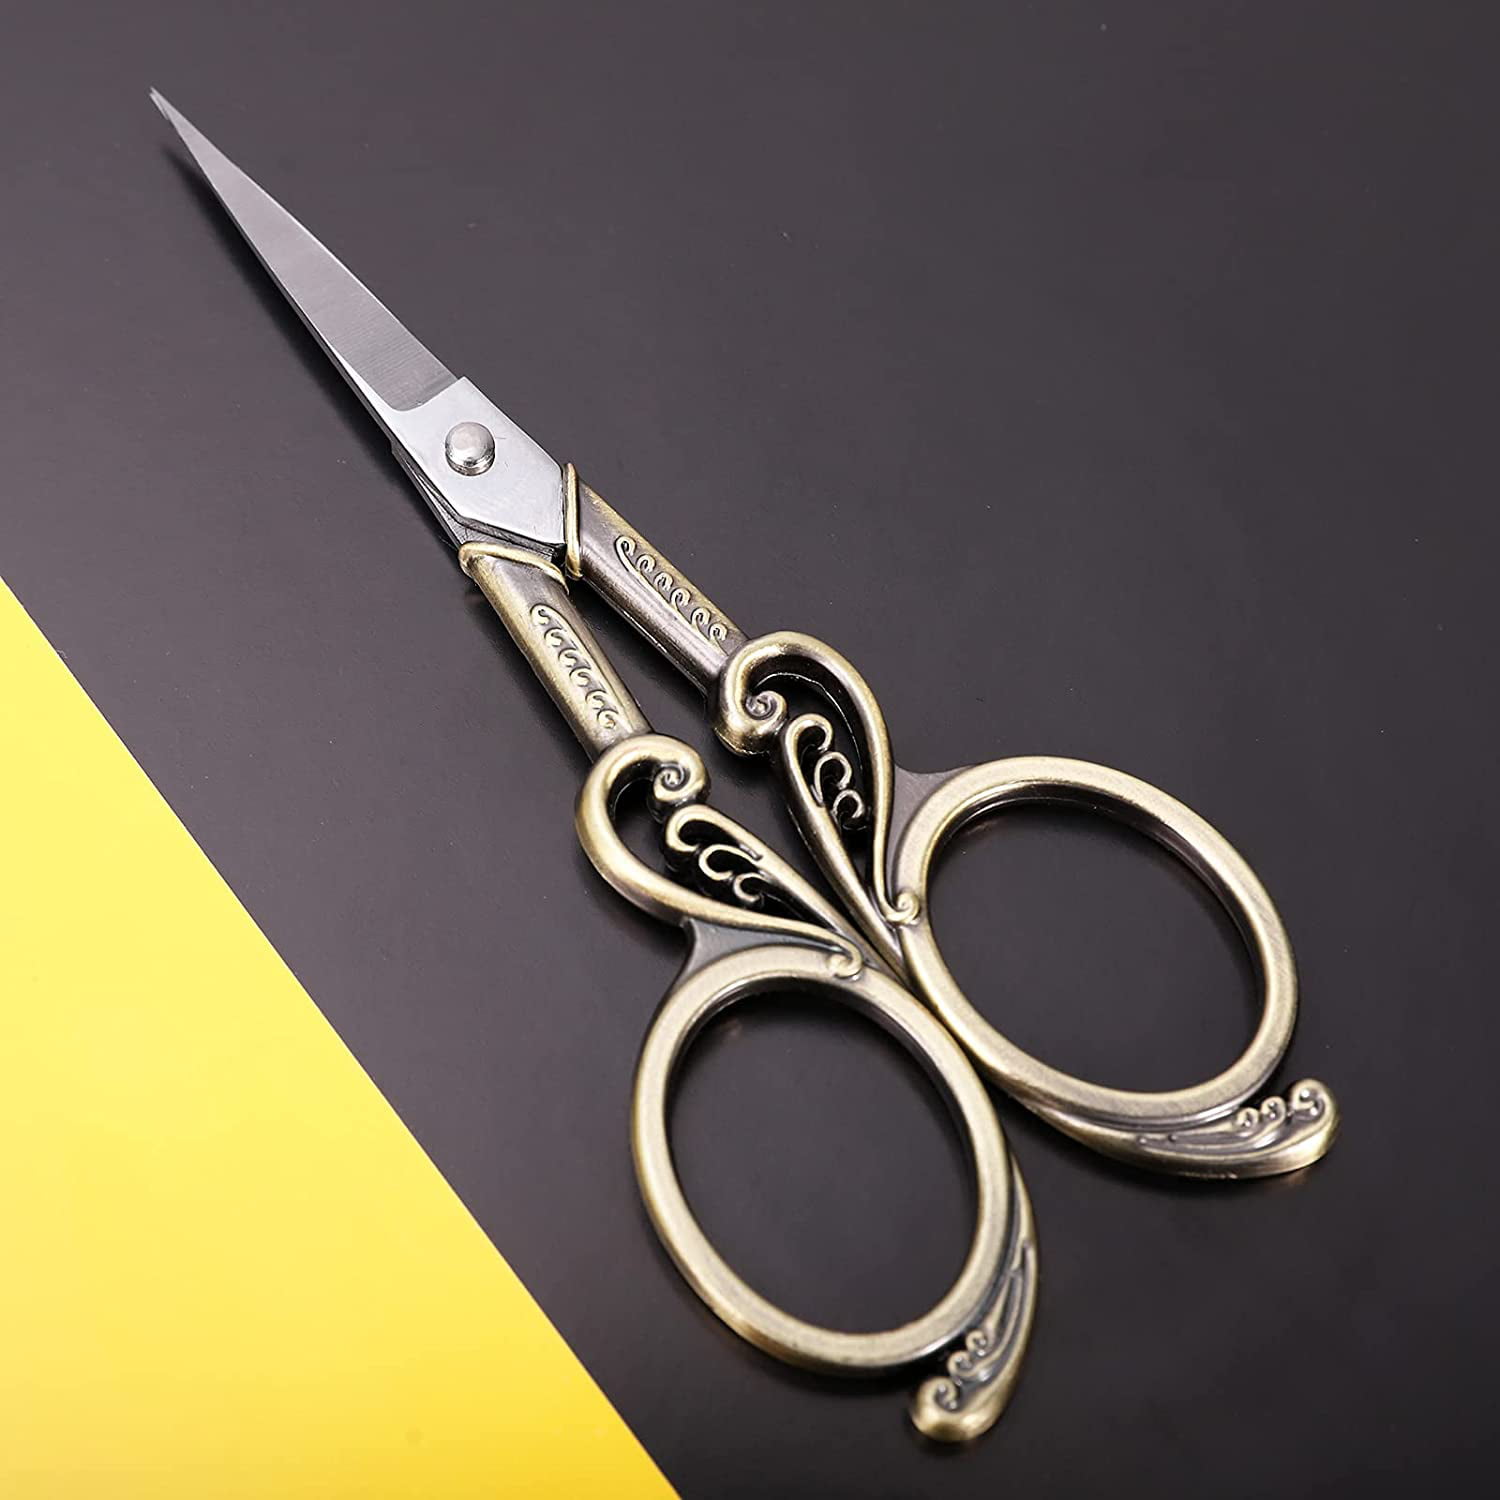  HITOPTY Embroidery Scissors, 4.5in Small Sharp Pointed